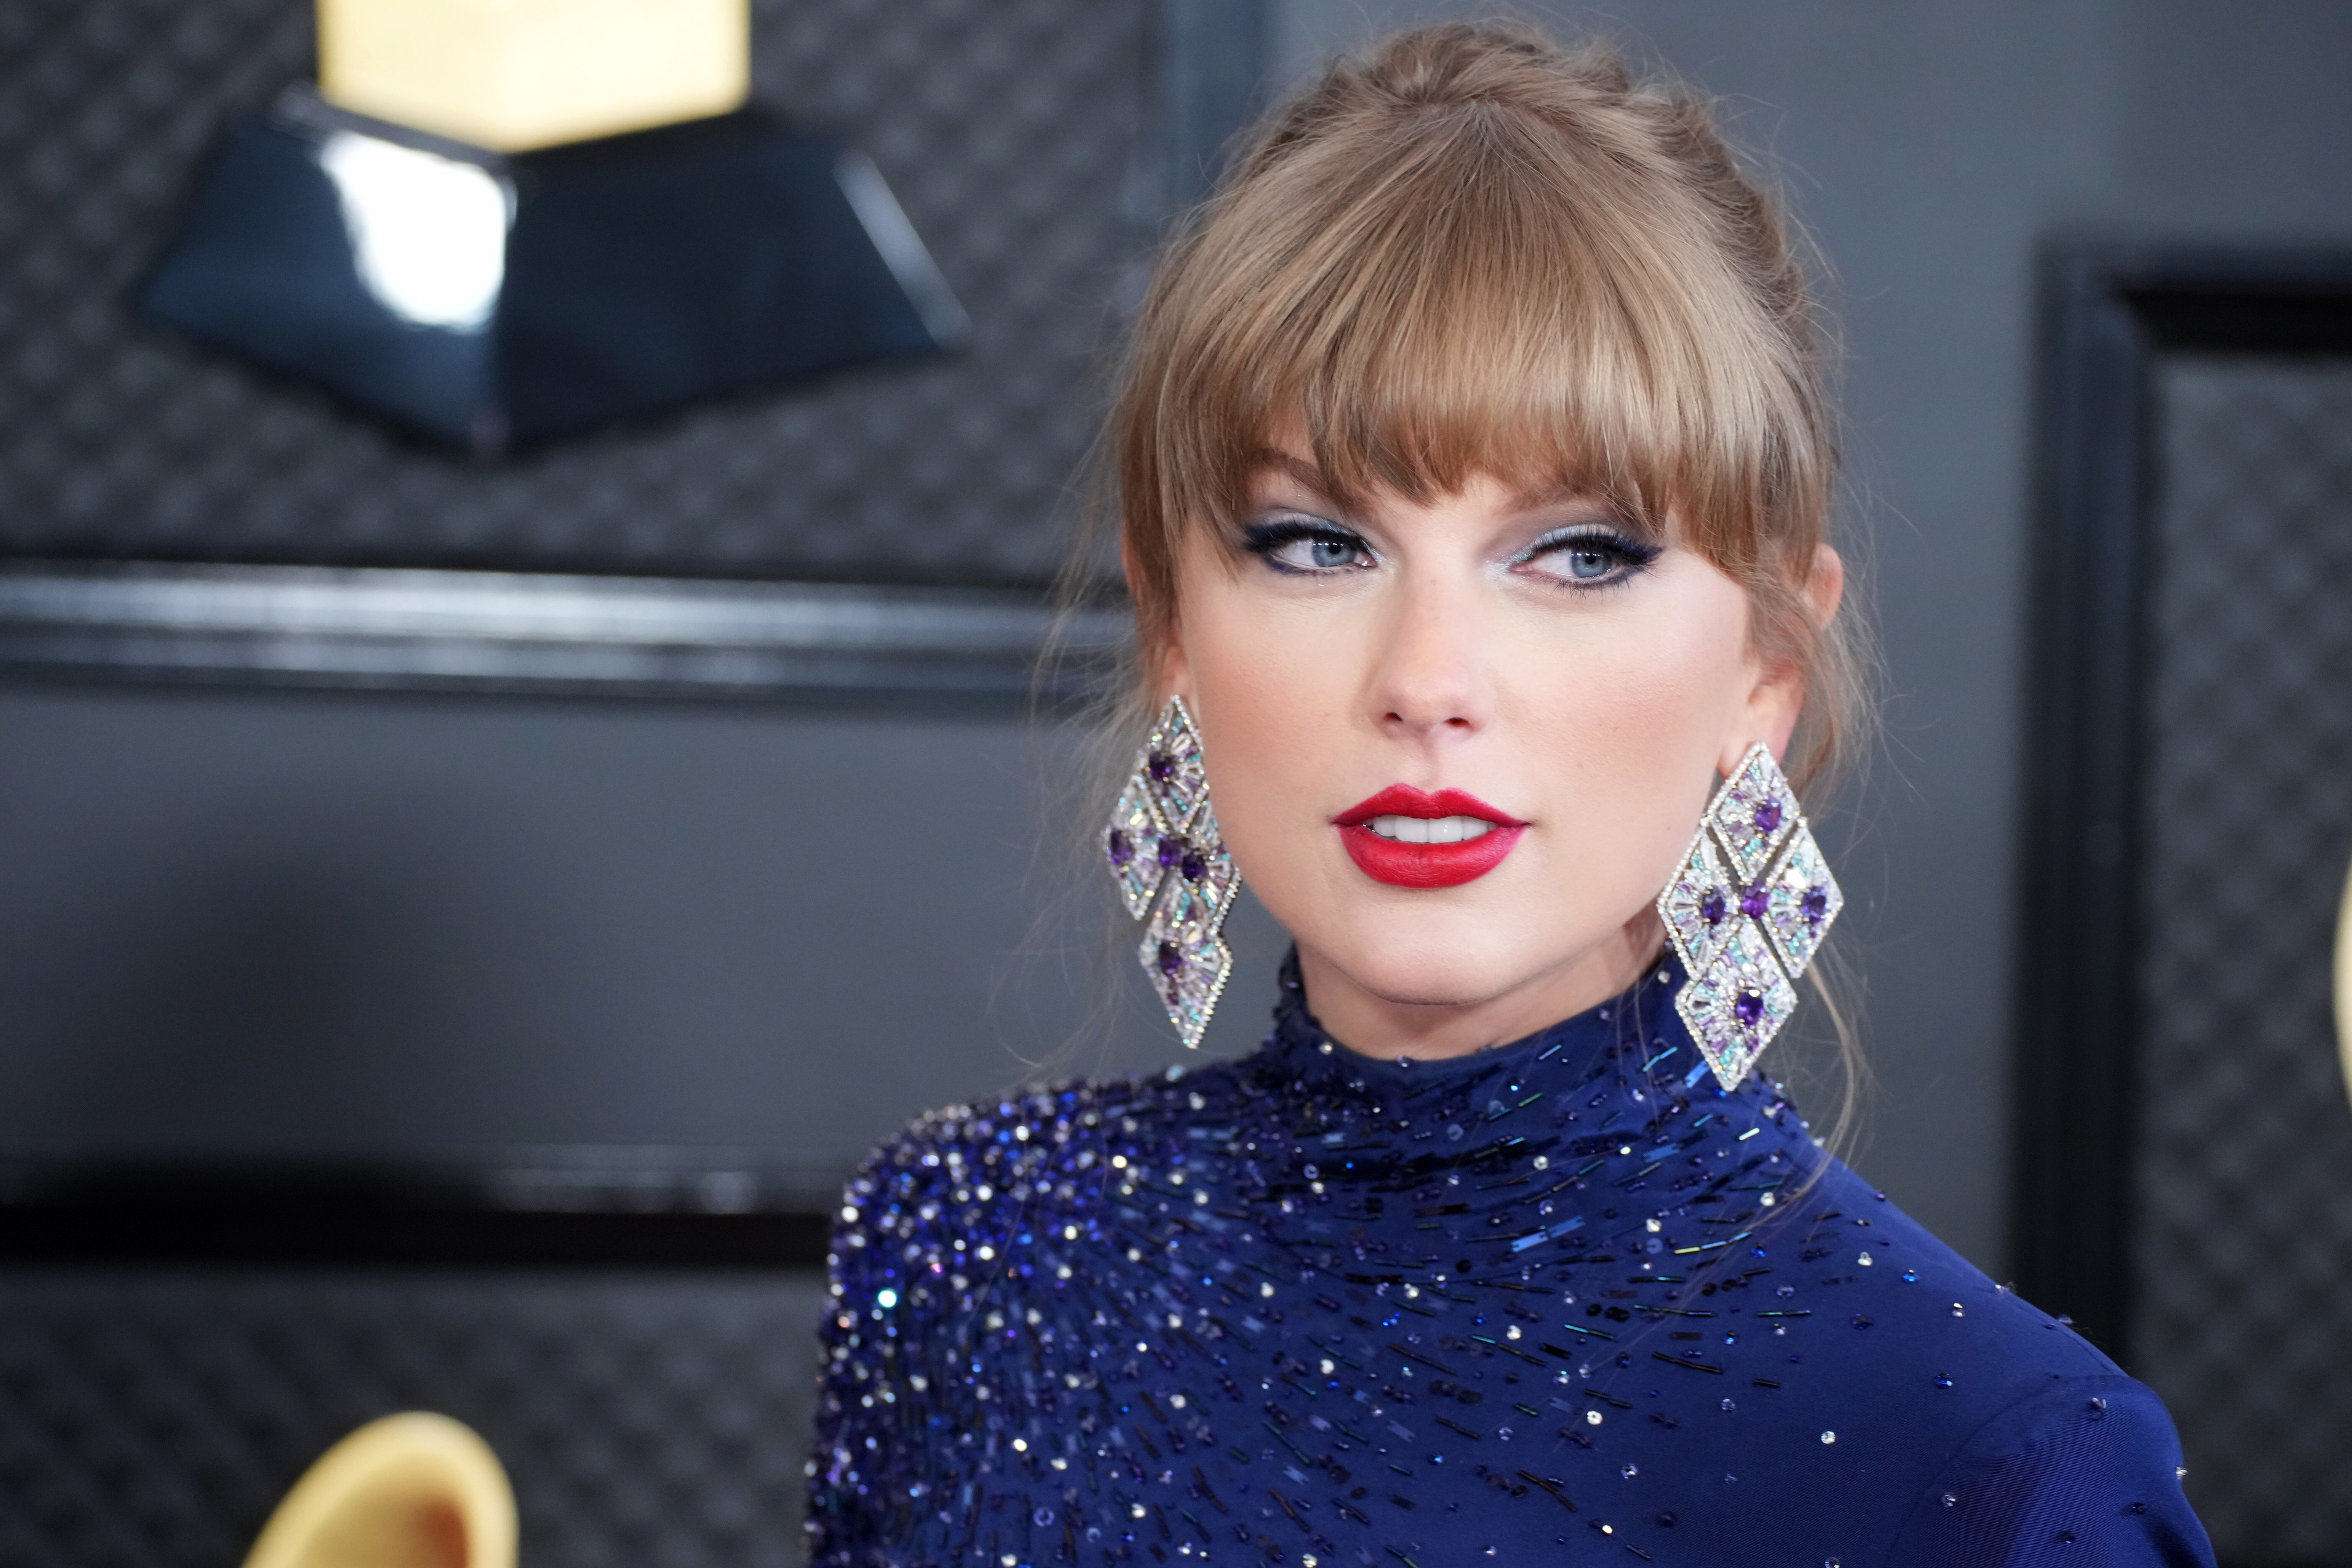 Close-up of Taylor wearing long, sparkly earrings